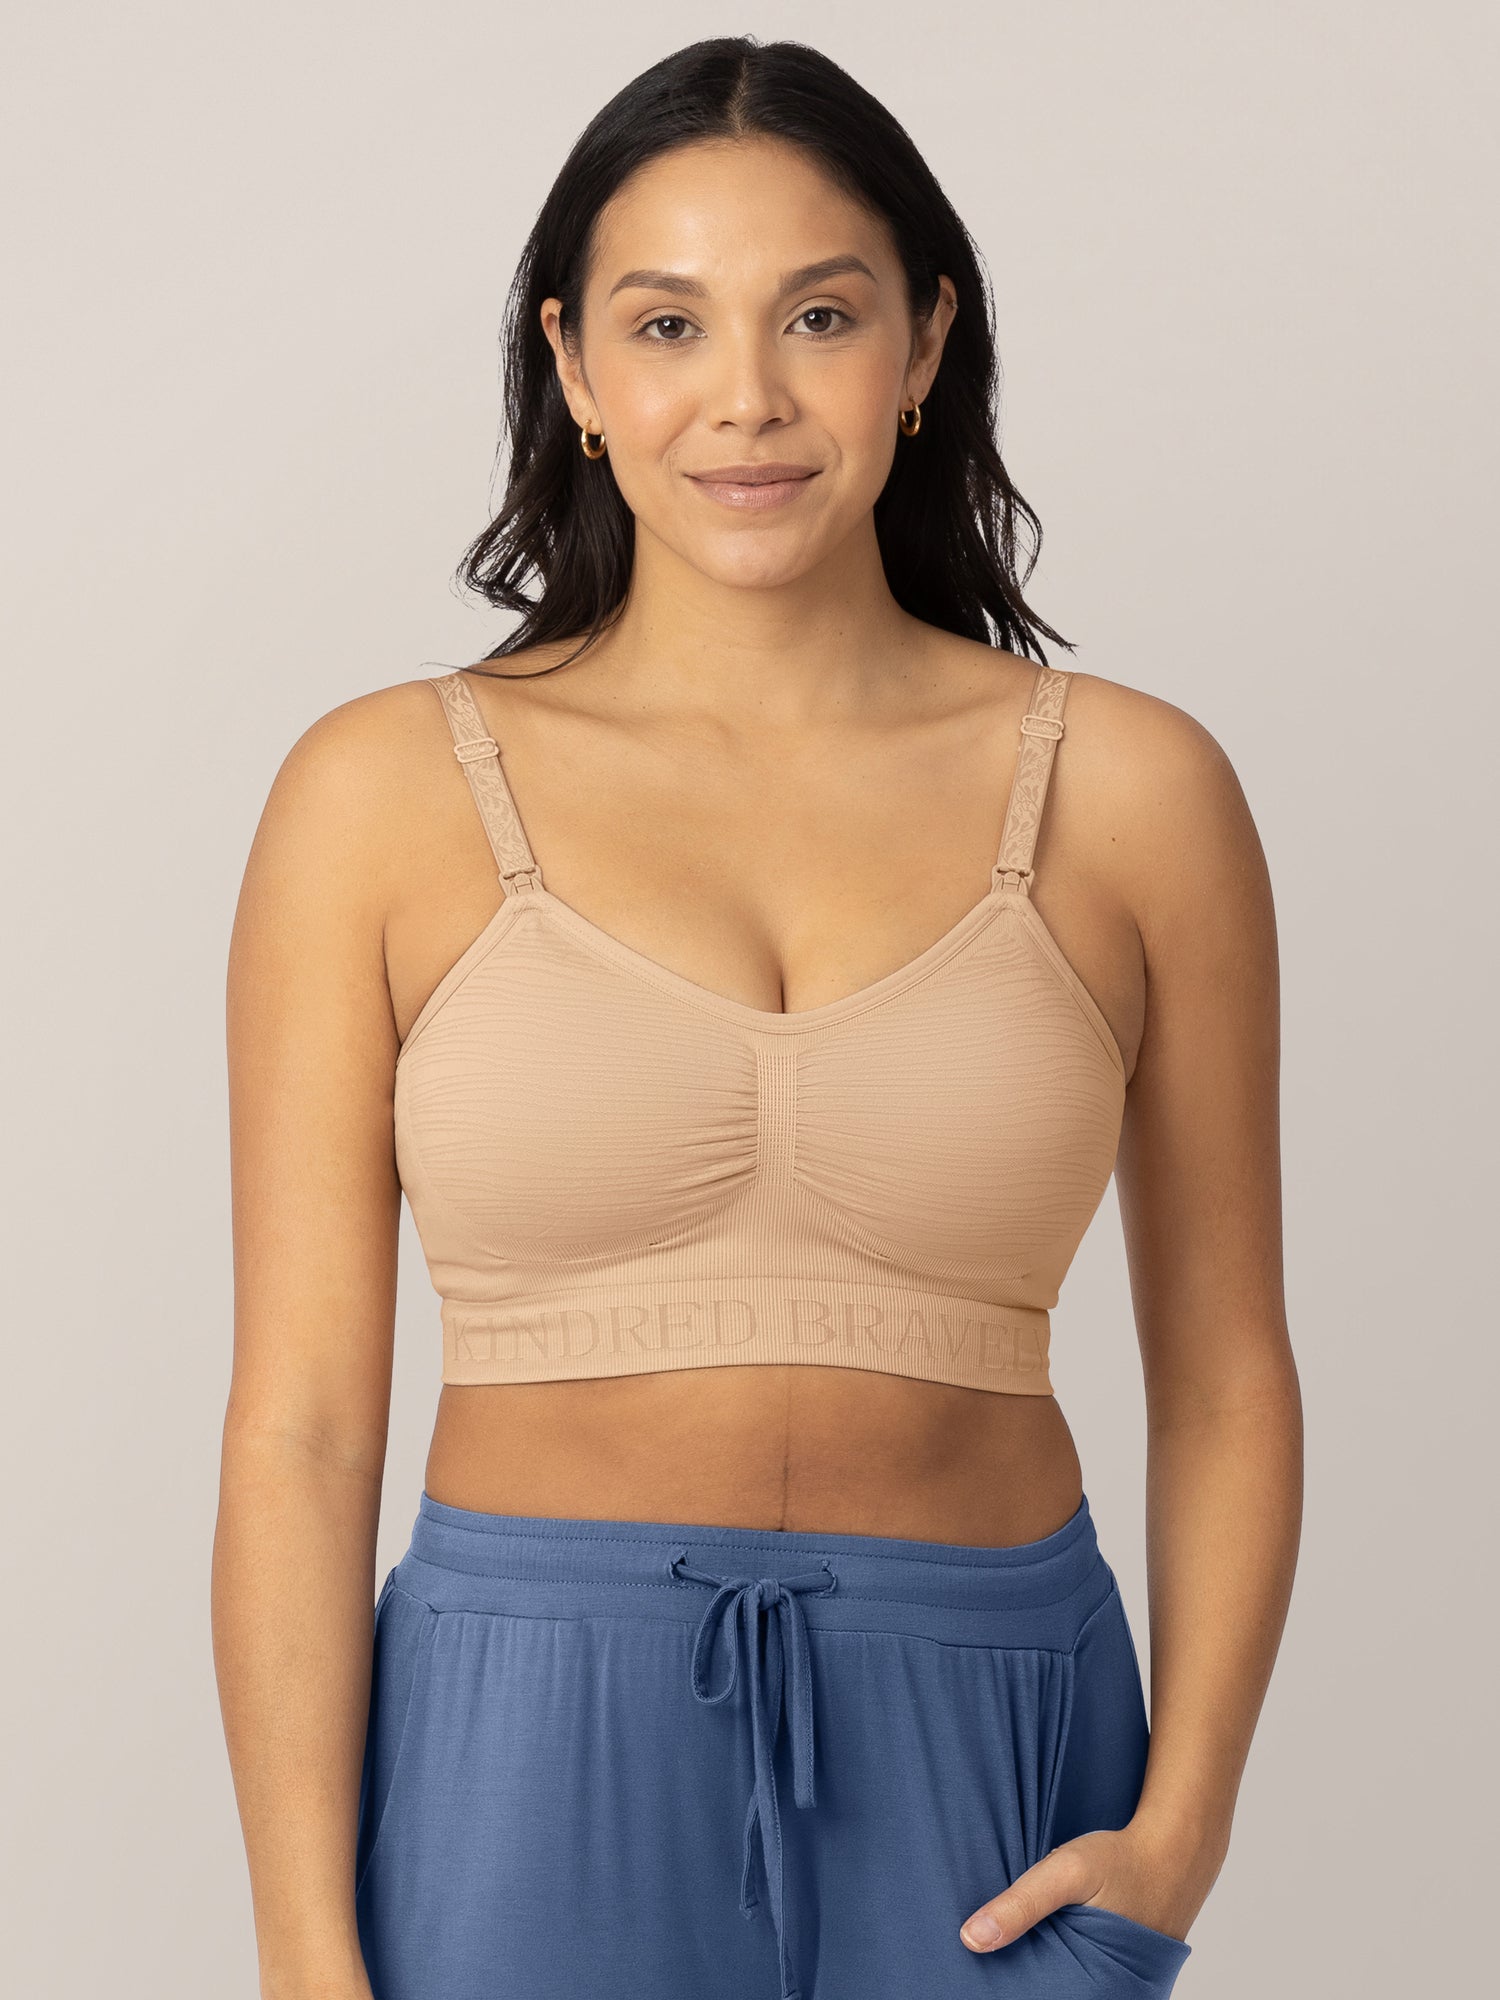 Intimates & Sleepwear, Kindred Bravely Sublime Handsfree Pumping Nursing  Bra Small Busty